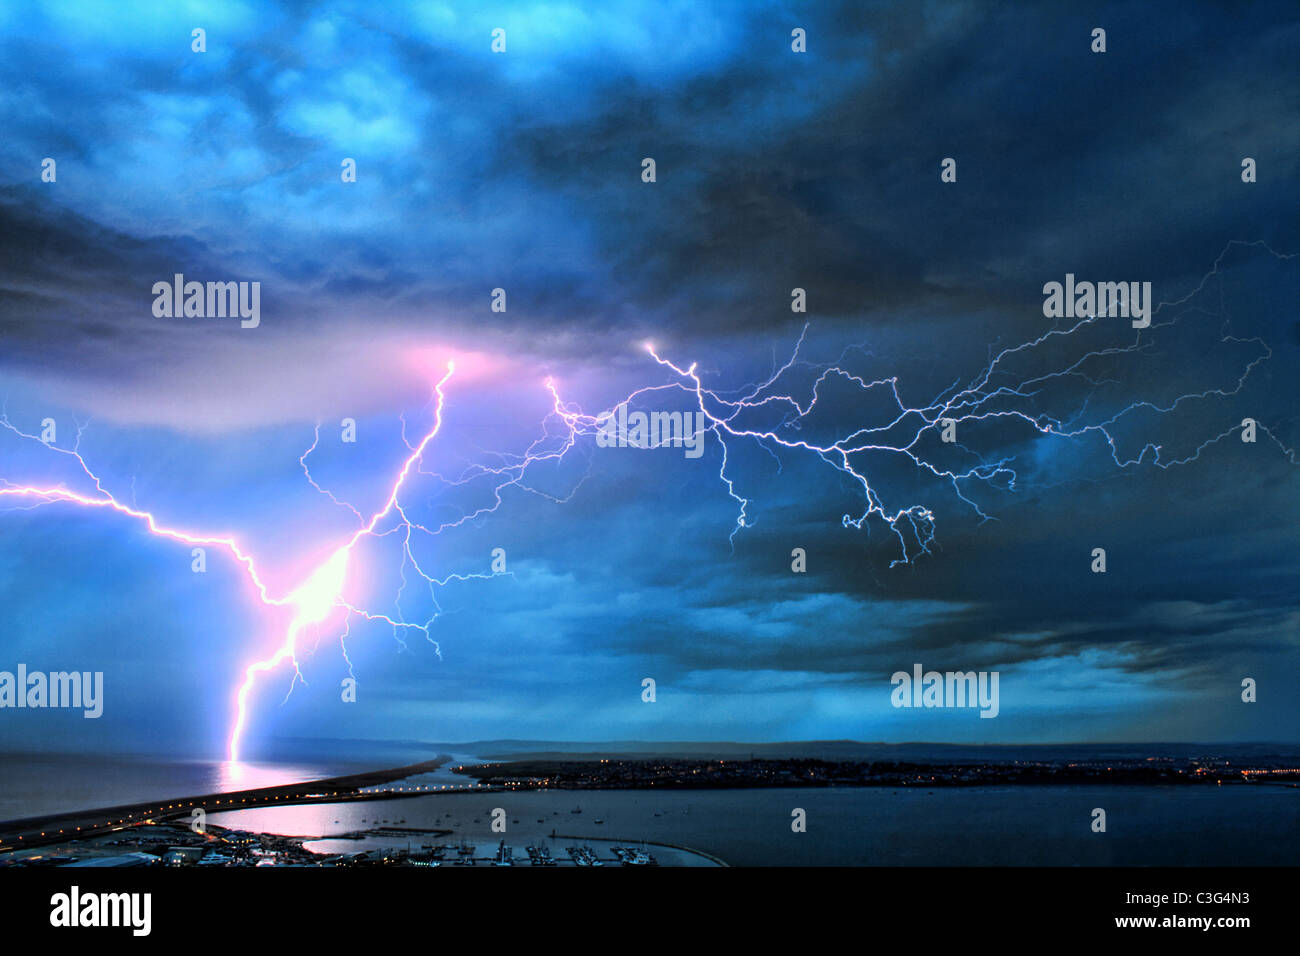 UK, Dorset, Stunning image of lightning over the Dorset coast during weekend storms after hot dry weather. Stock Photo